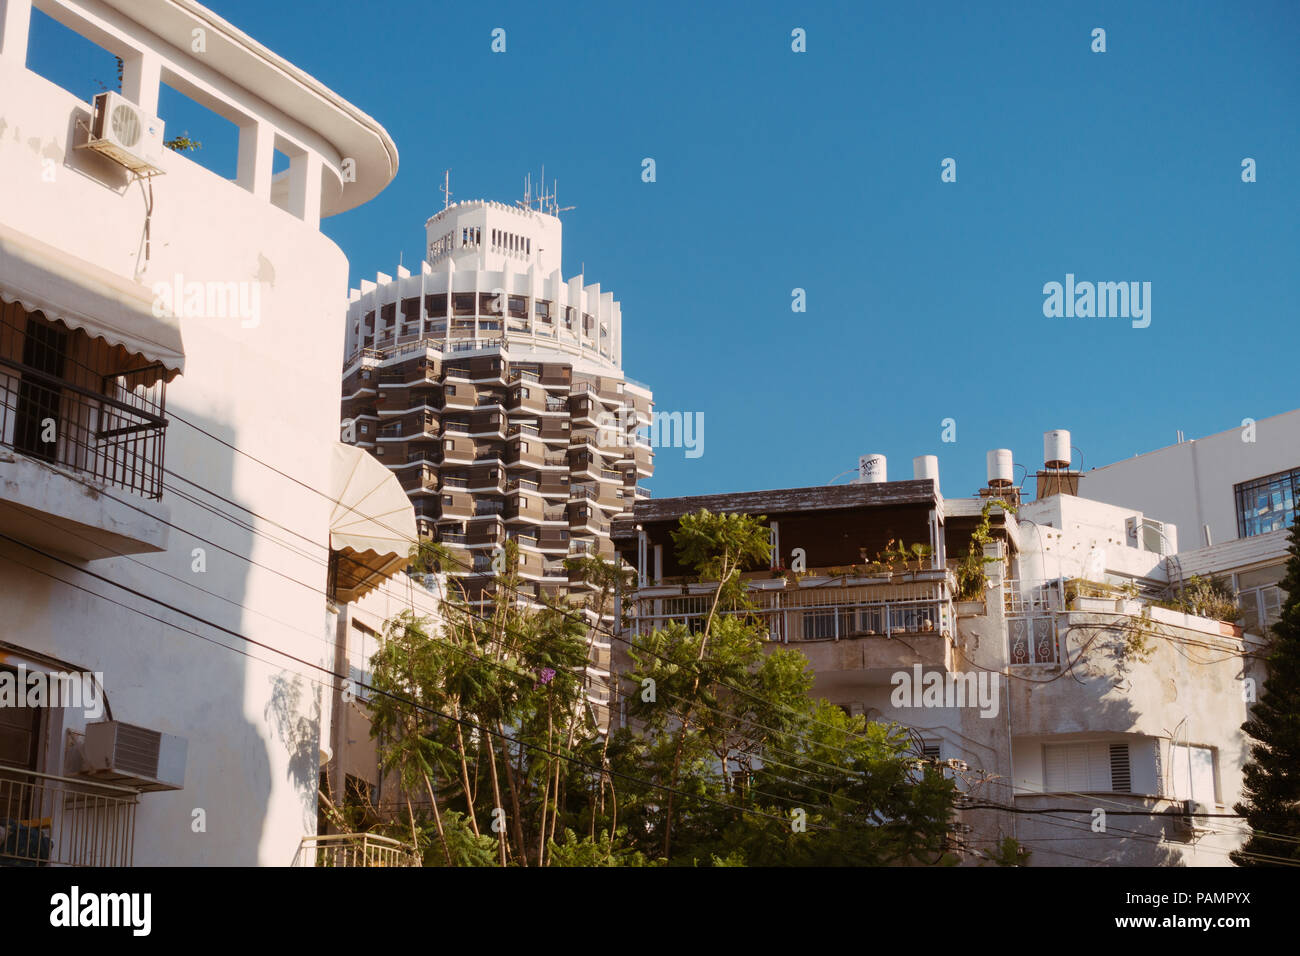 the brown and white cylindrical tower of Dizengoff Center peeks over some white bauhaus-era buildings in Tel Aviv-Yafo, Israel Stock Photo